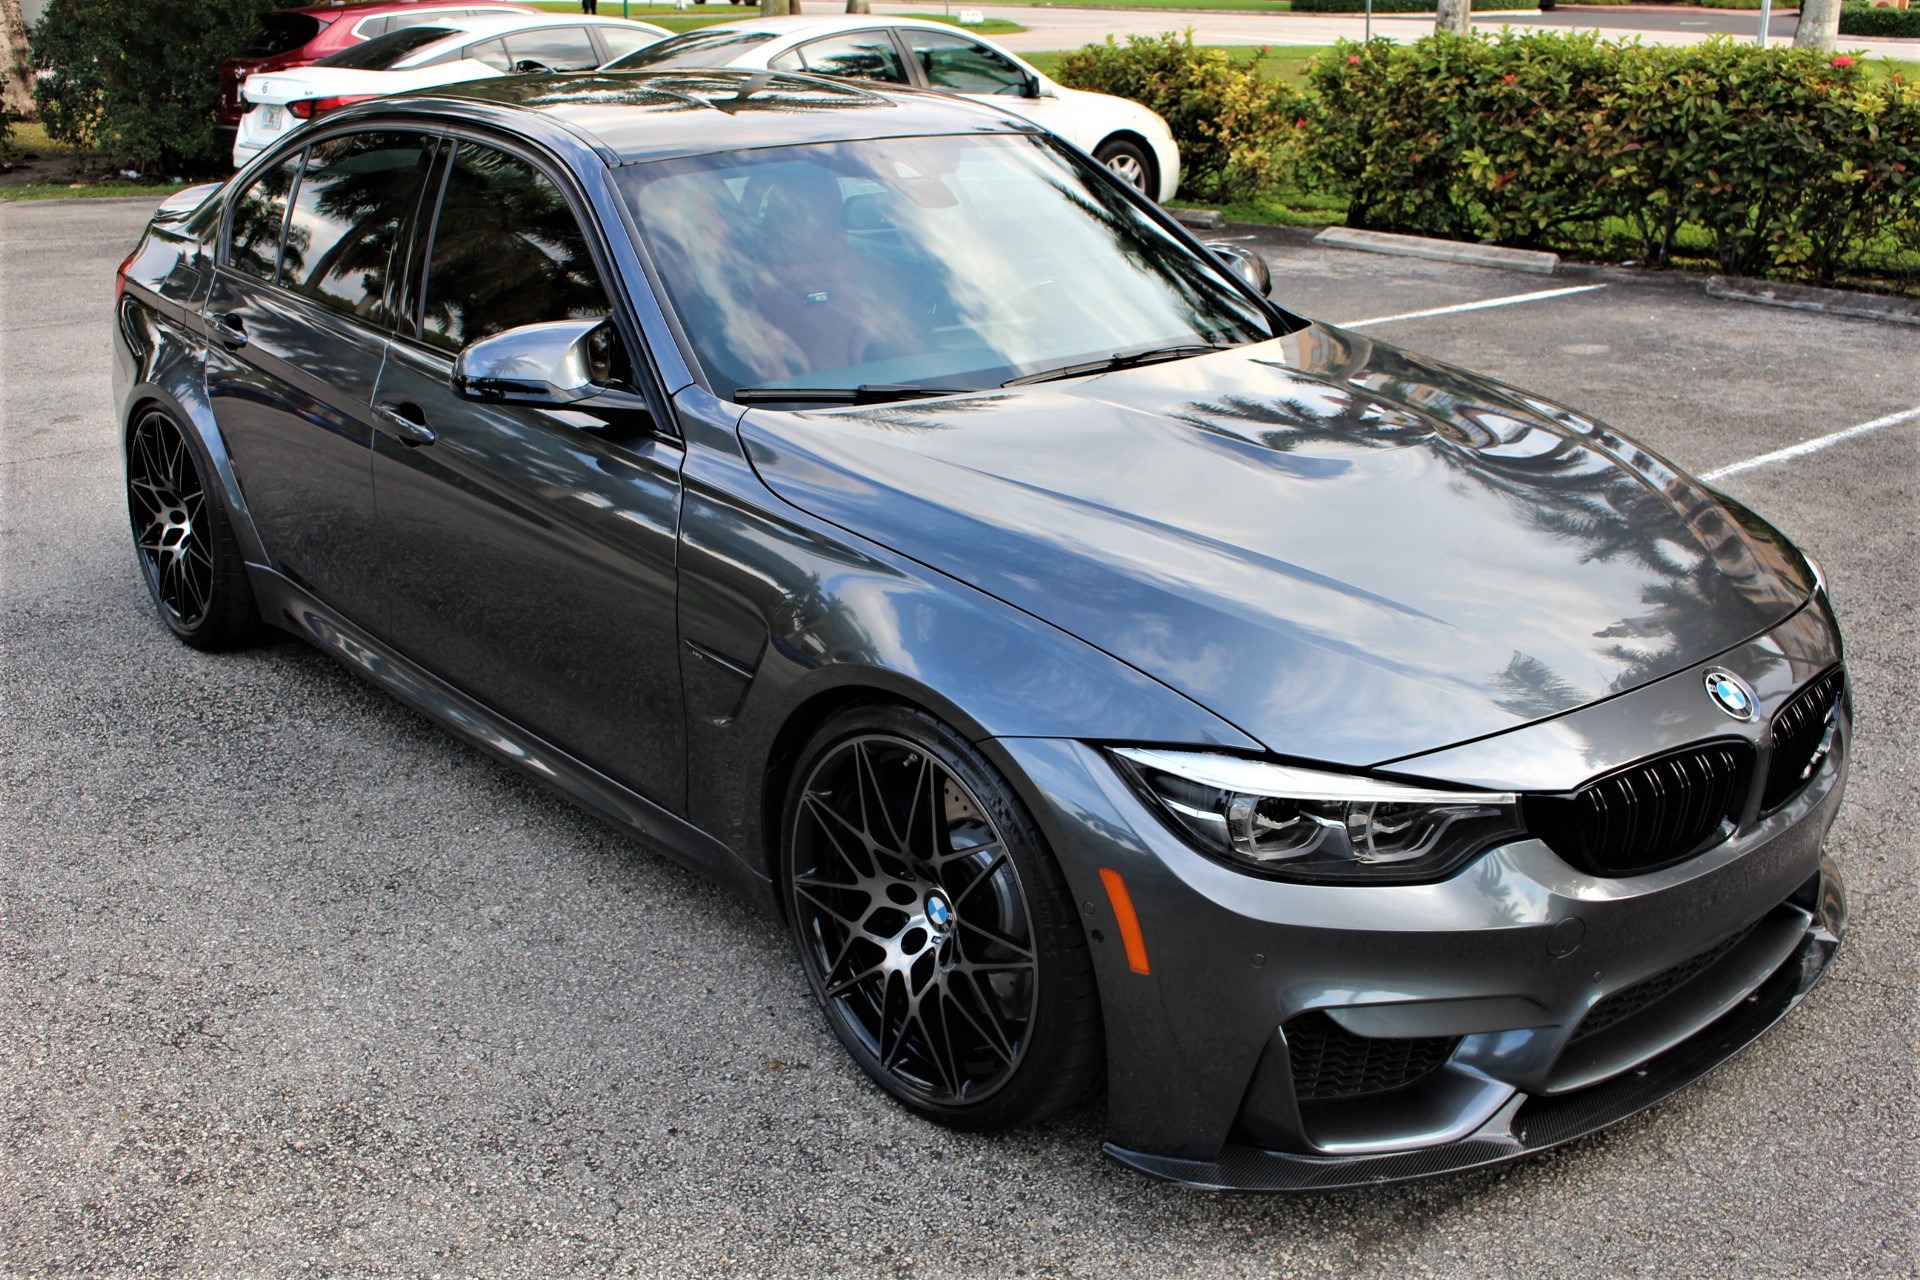 Used 2018 BMW M3 for sale Sold at The Gables Sports Cars in Miami FL 33146 2